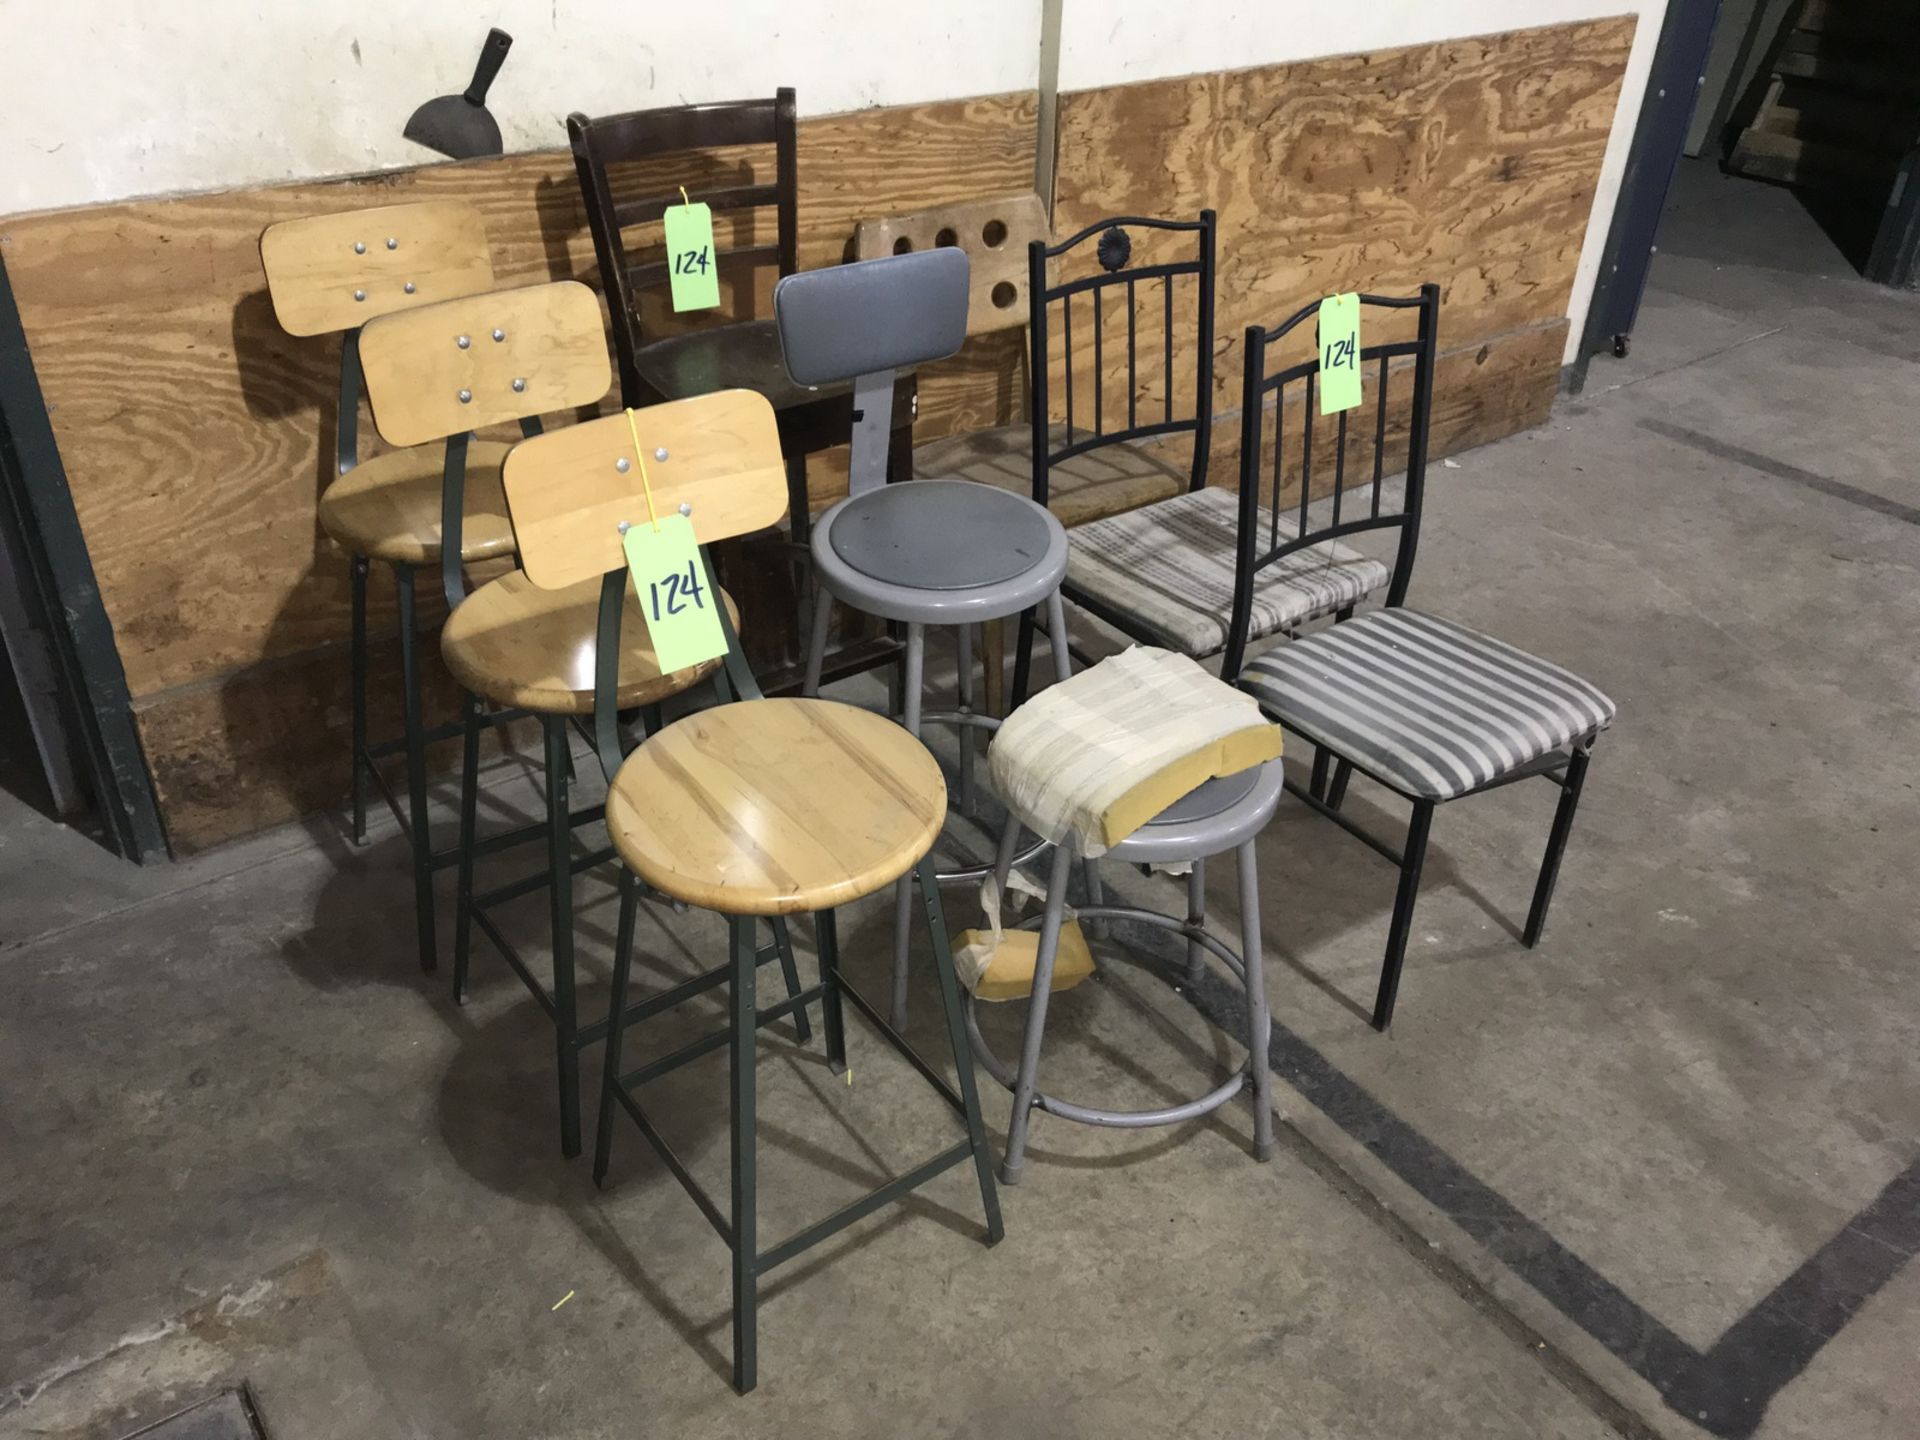 Approximately (9) Stools and Chairs